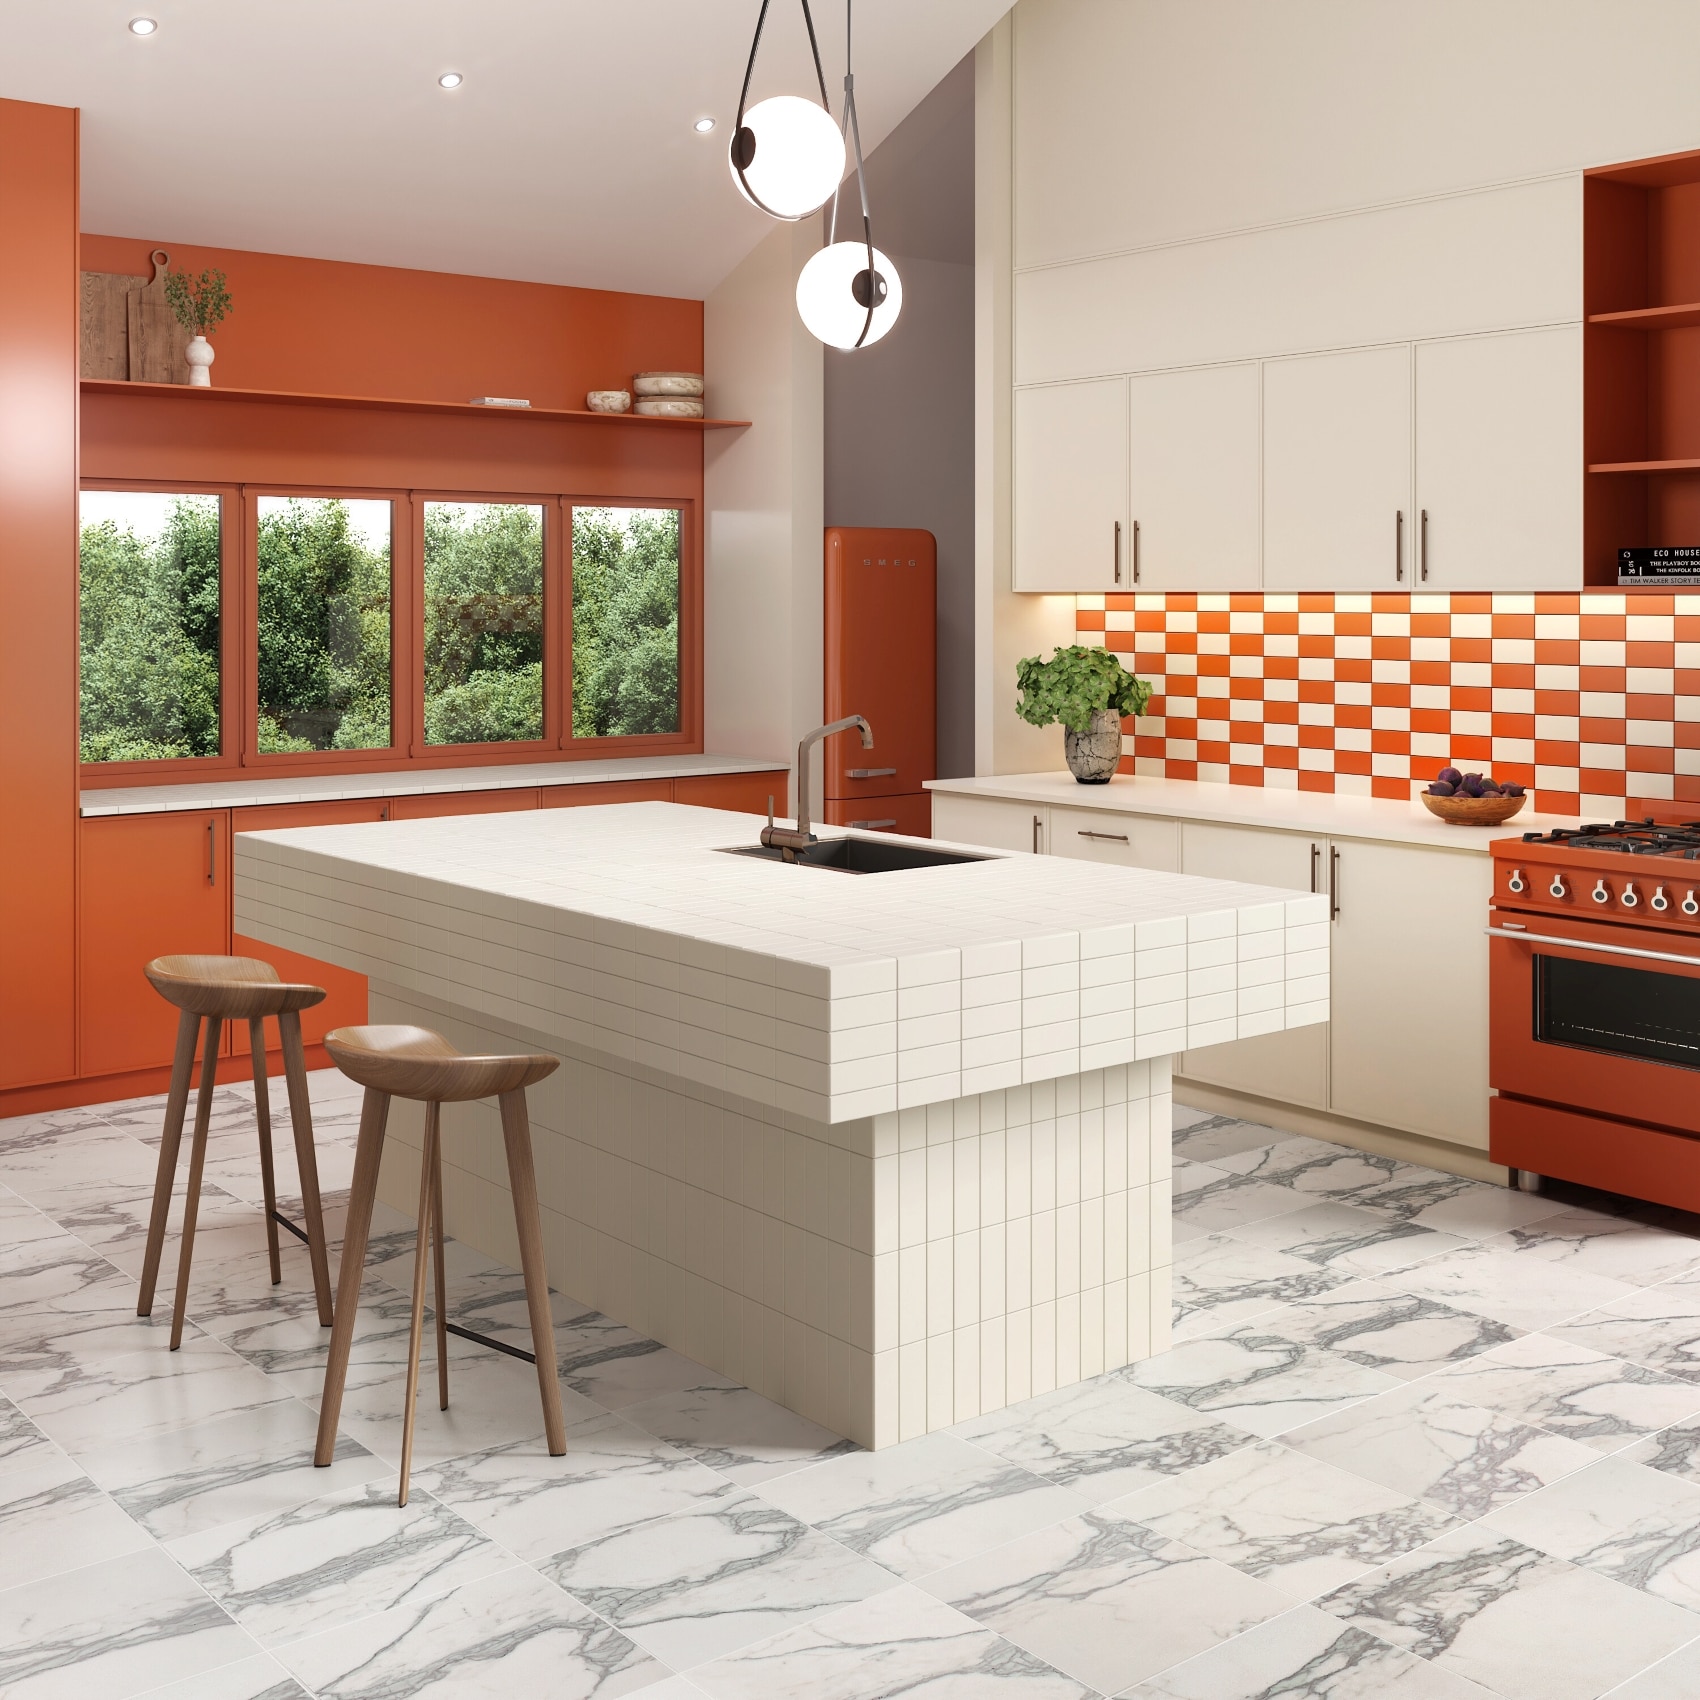 Open concept kitchen with tiled countertop and white and orange checked backsplash.